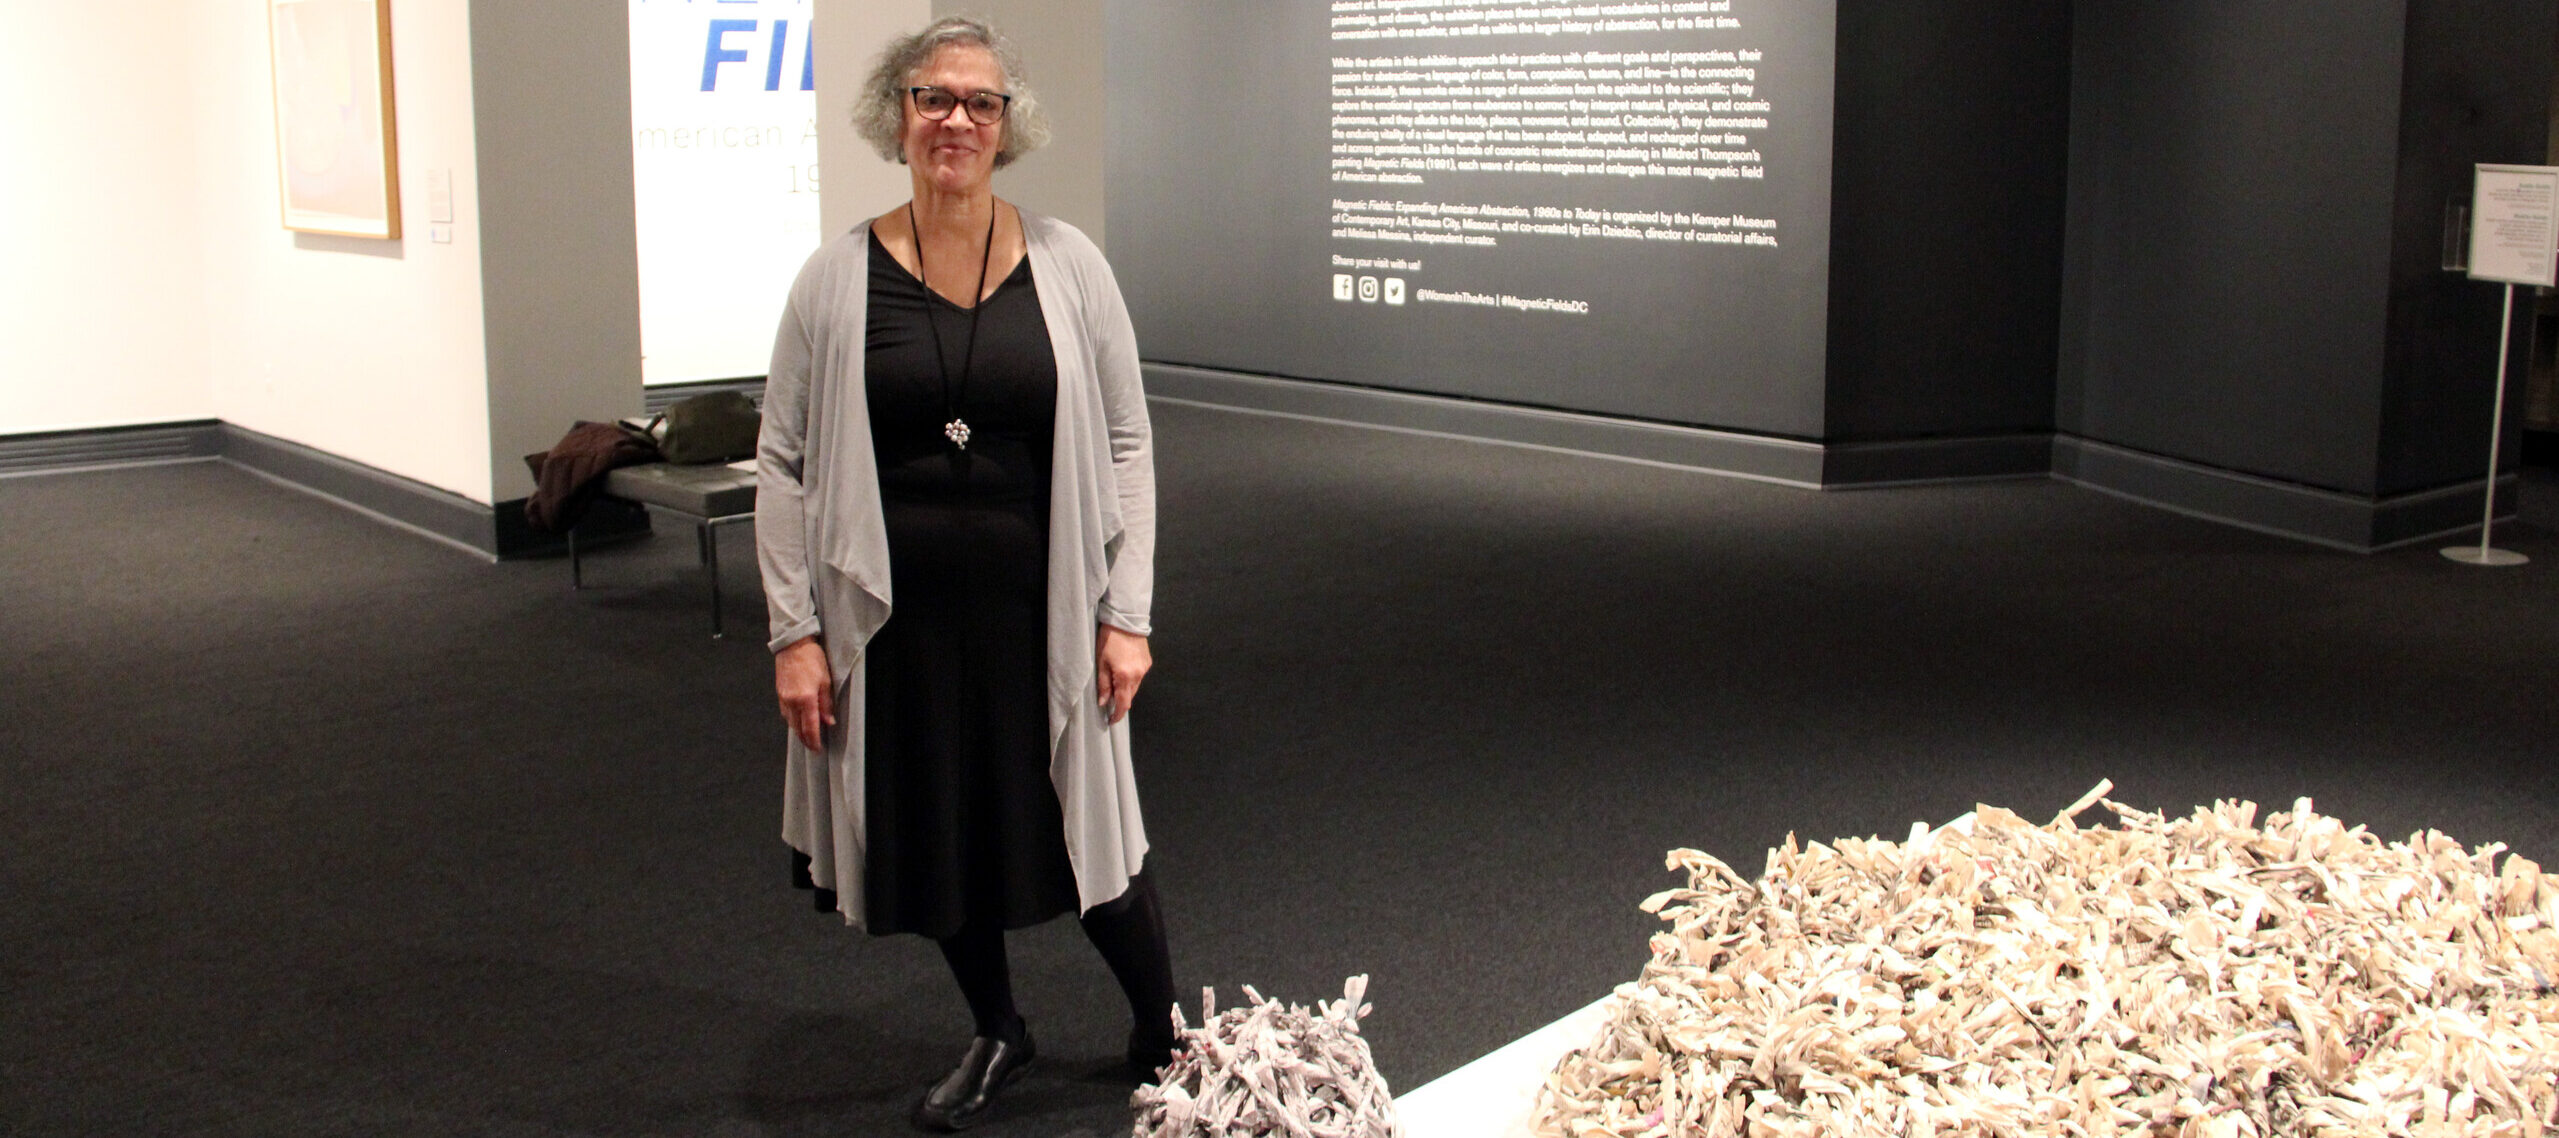 A woman with a light skin tone and gray, short hair is standing in a gallery space next to a sculpture lying on the ground. The sculpture is a large, round shape, and a smaller, round ball of newspapers folded into thin tubes and tied together. The many tubes tied together look like brushes made from newspaper. They are black and white with some pops of color in between.